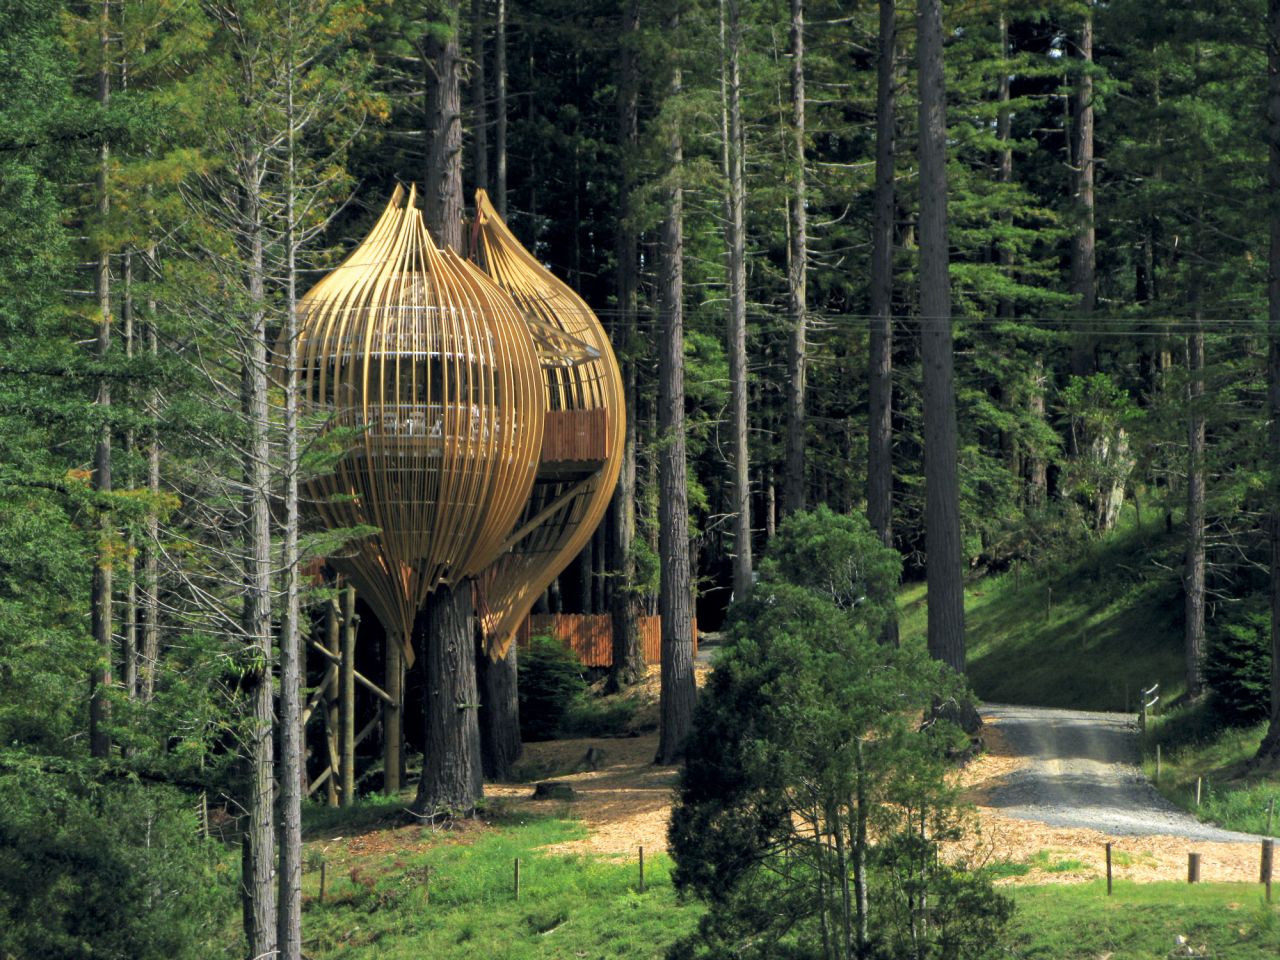 The Yellow Treehouse in New Zealand.